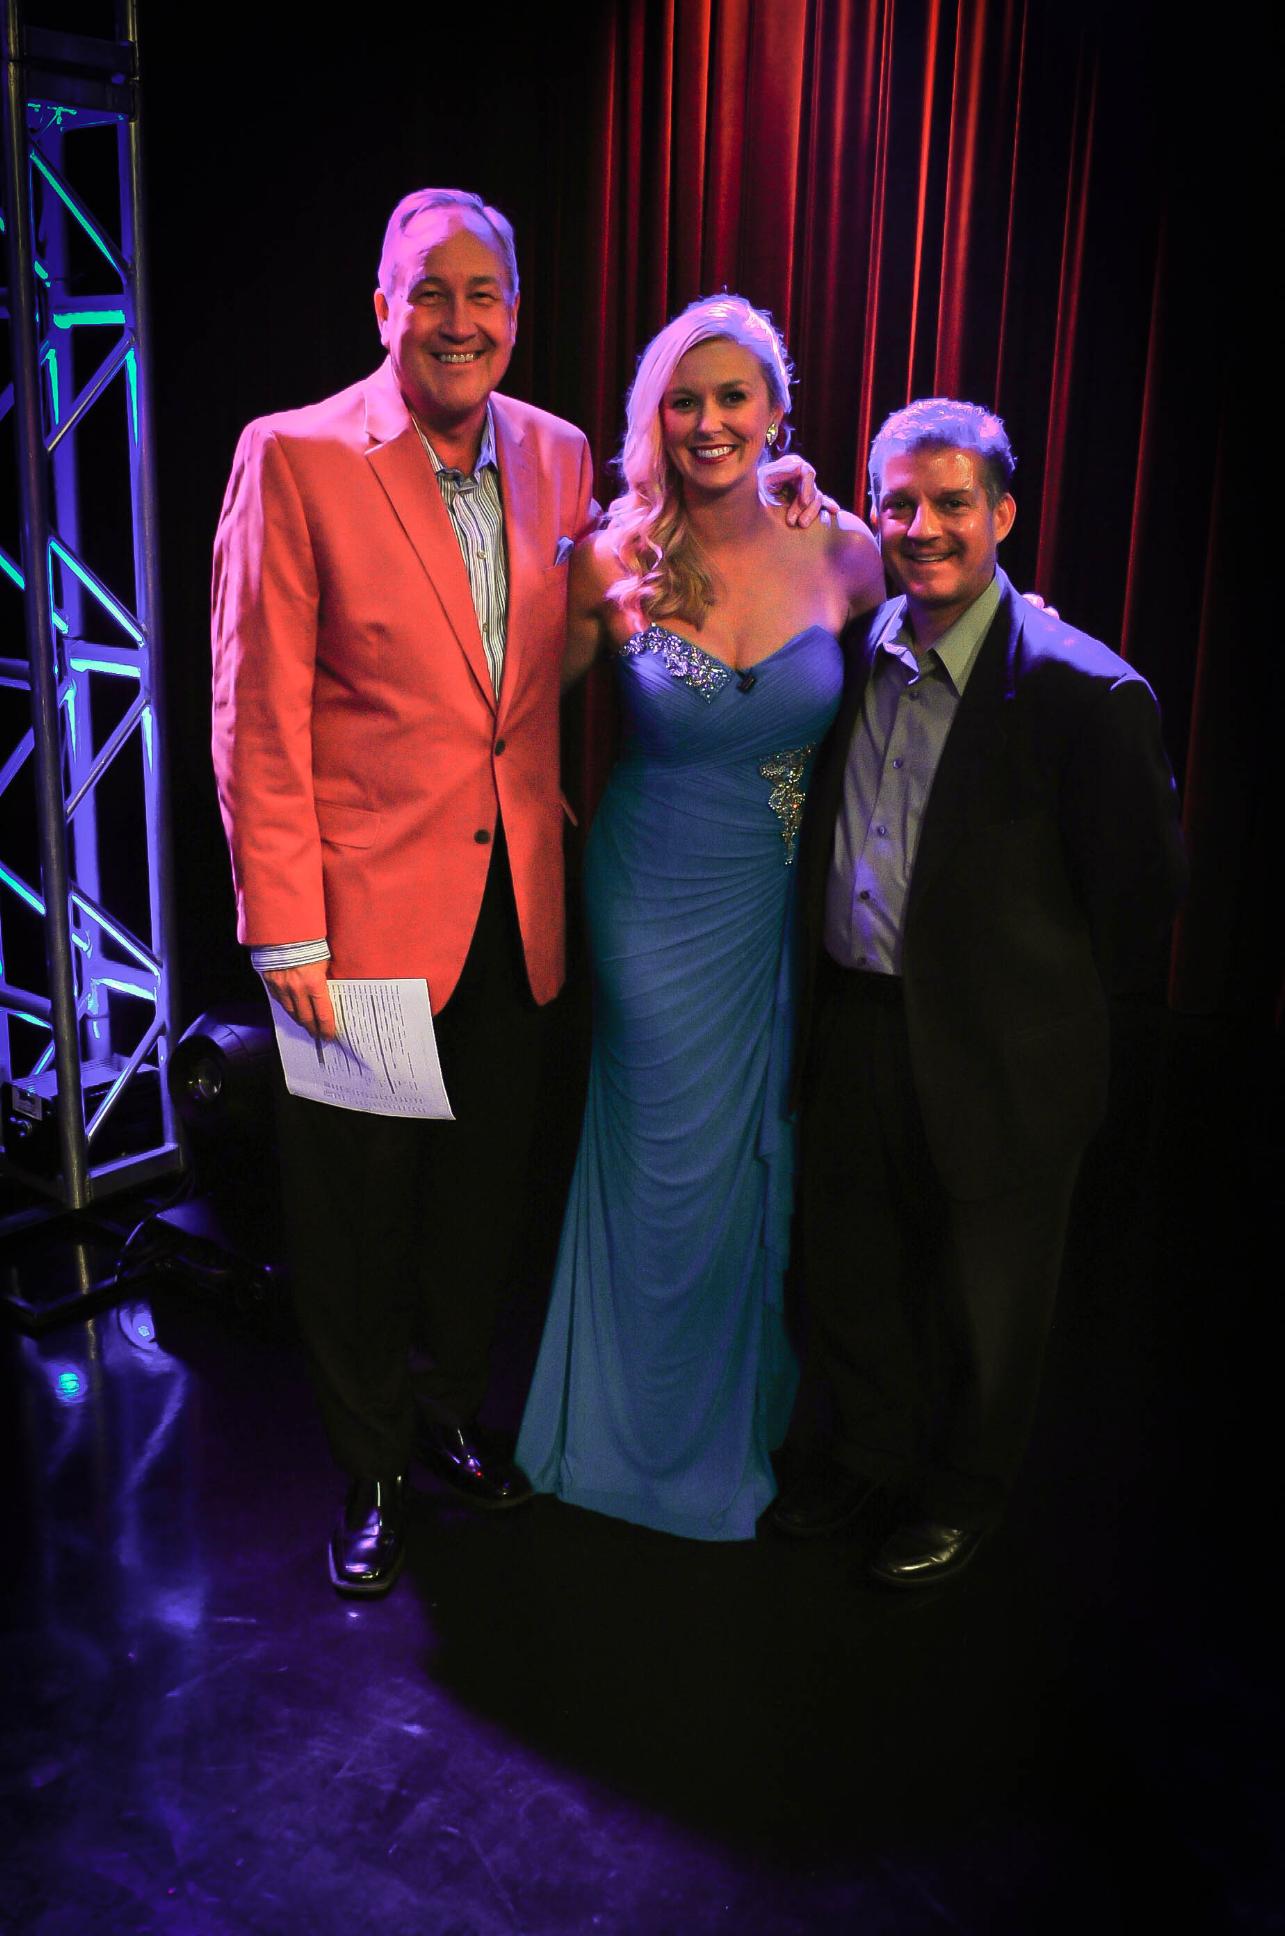 On the set of Michiana's Rising Star (Season 3) with co-hosts Allison Hayes and Mark Durocher.